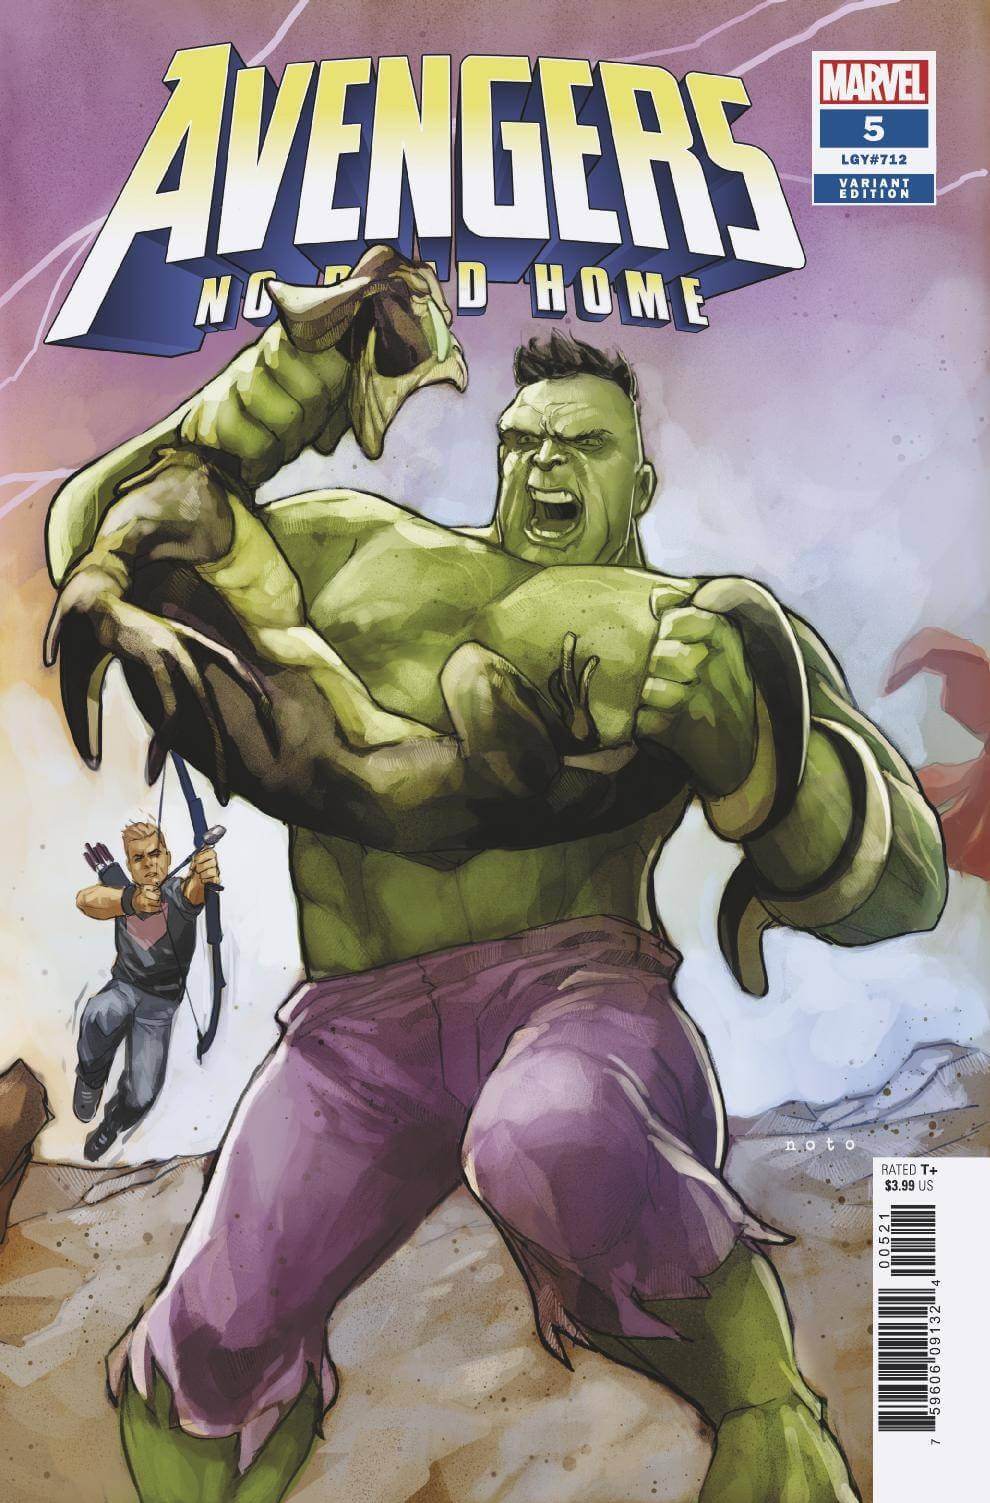 AVENGERS NO ROAD HOME #5 (OF 10) Phil Noto CONNECTING Variant (03/13/2019) MARVEL